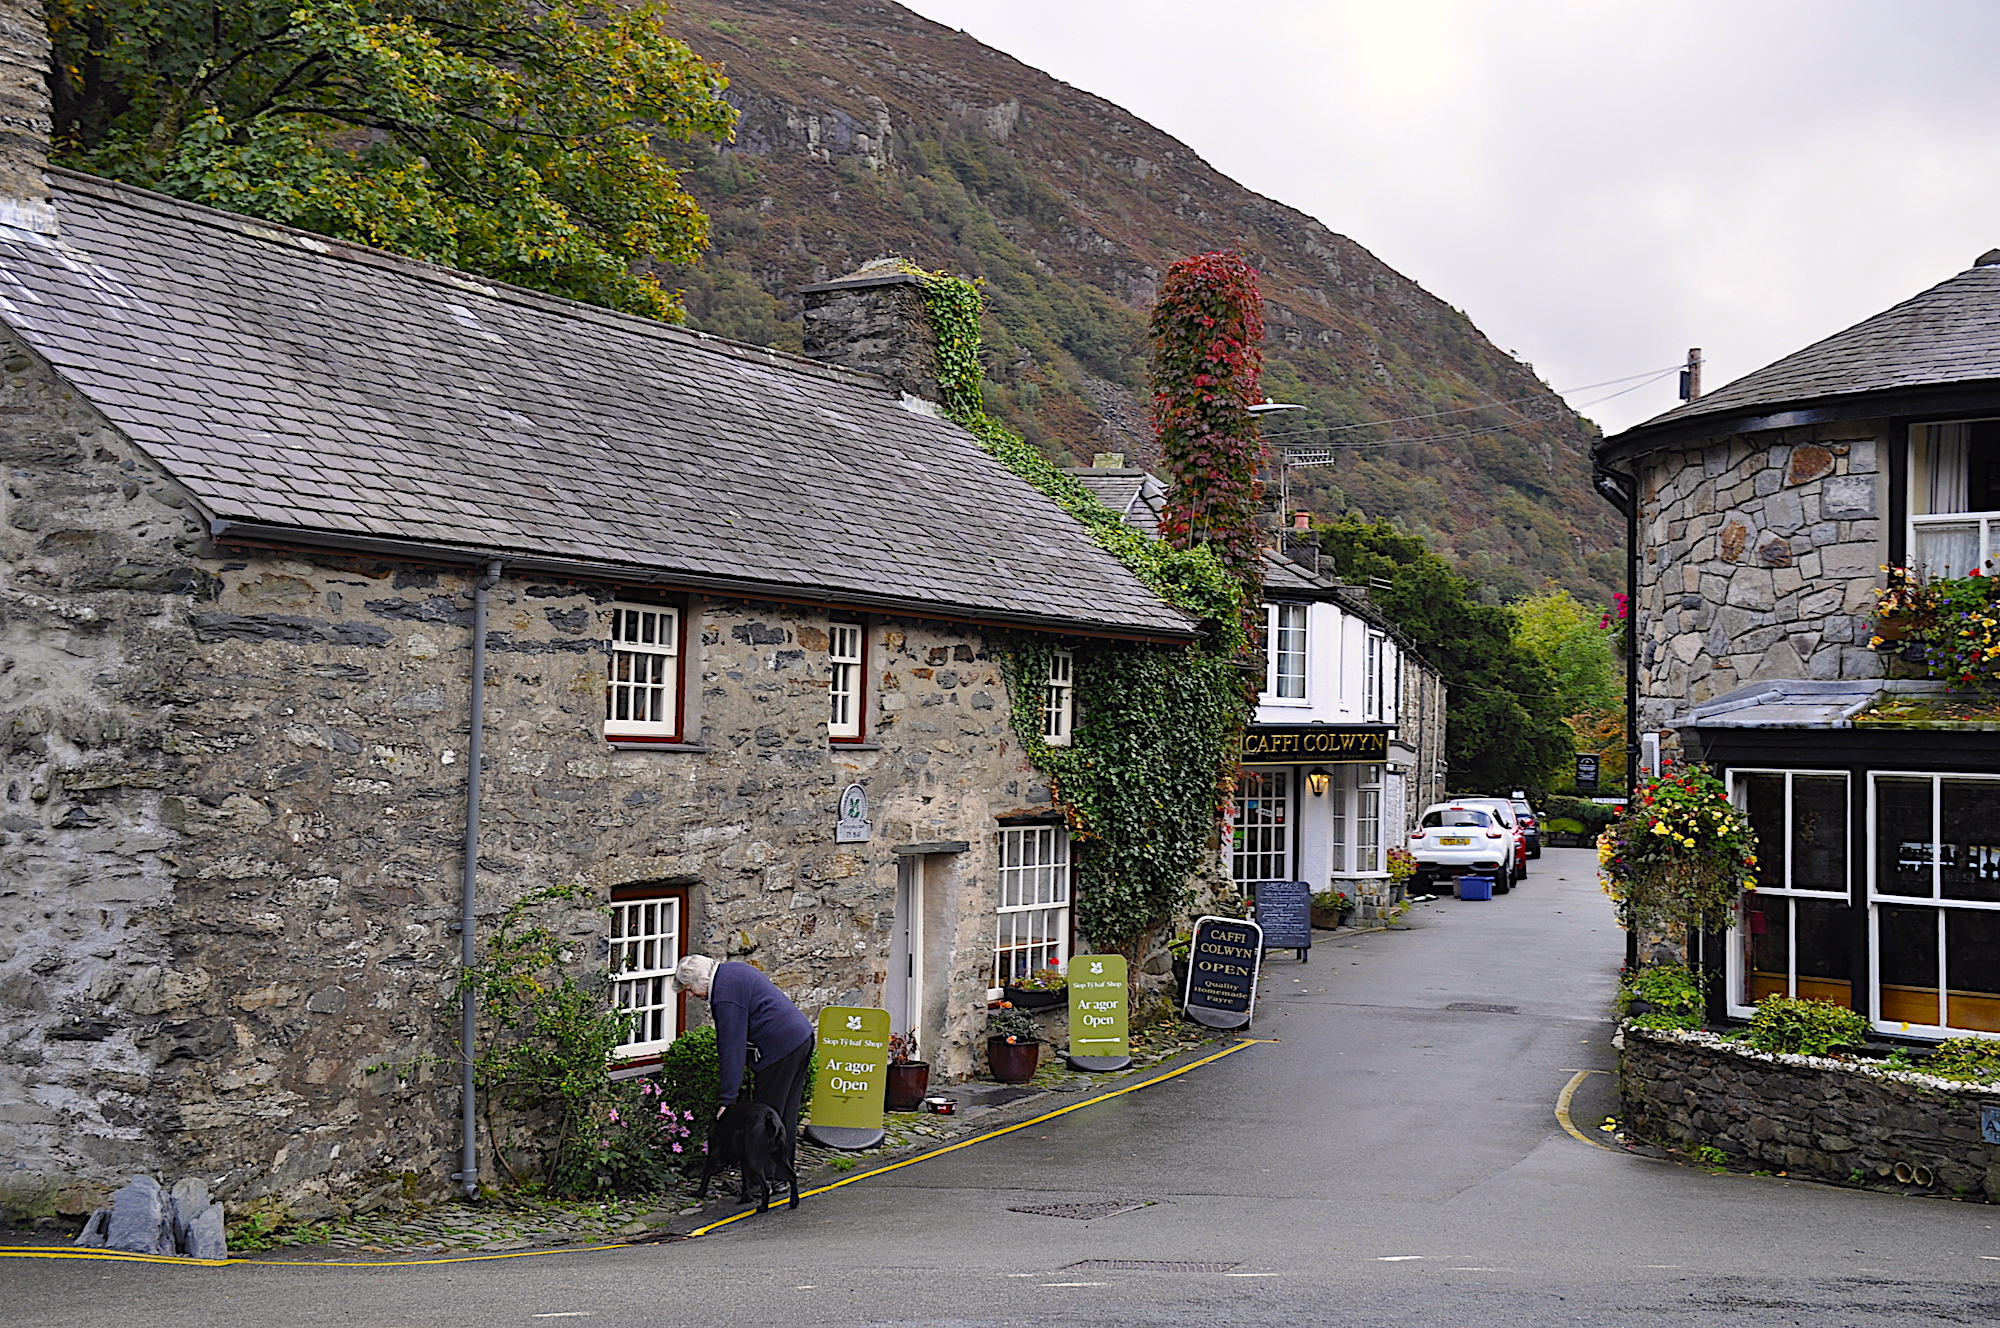 The shops and taverns of Beddgelert brimming with flowers, ivy and beautiful food, drink and locally made products.